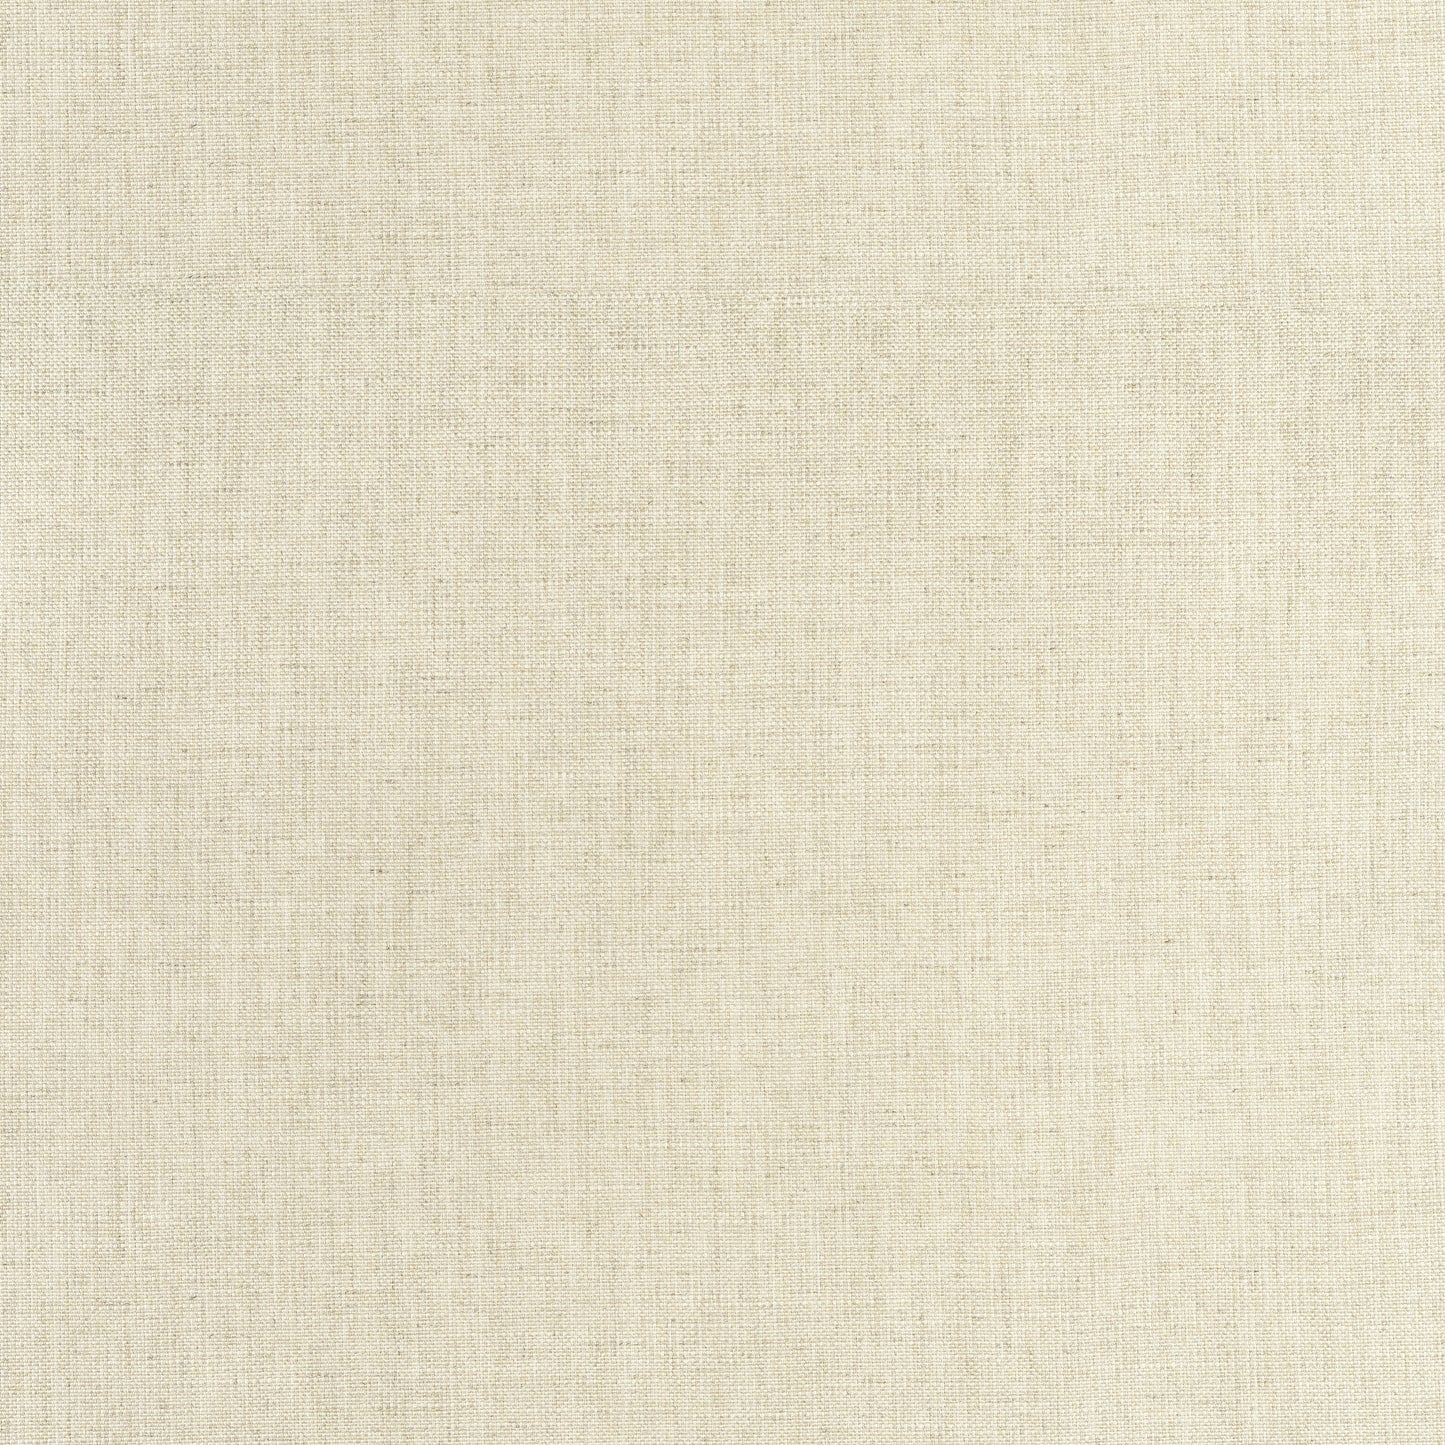 Purchase Thibaut Fabric Item# W75201 pattern name Ambient color Flax